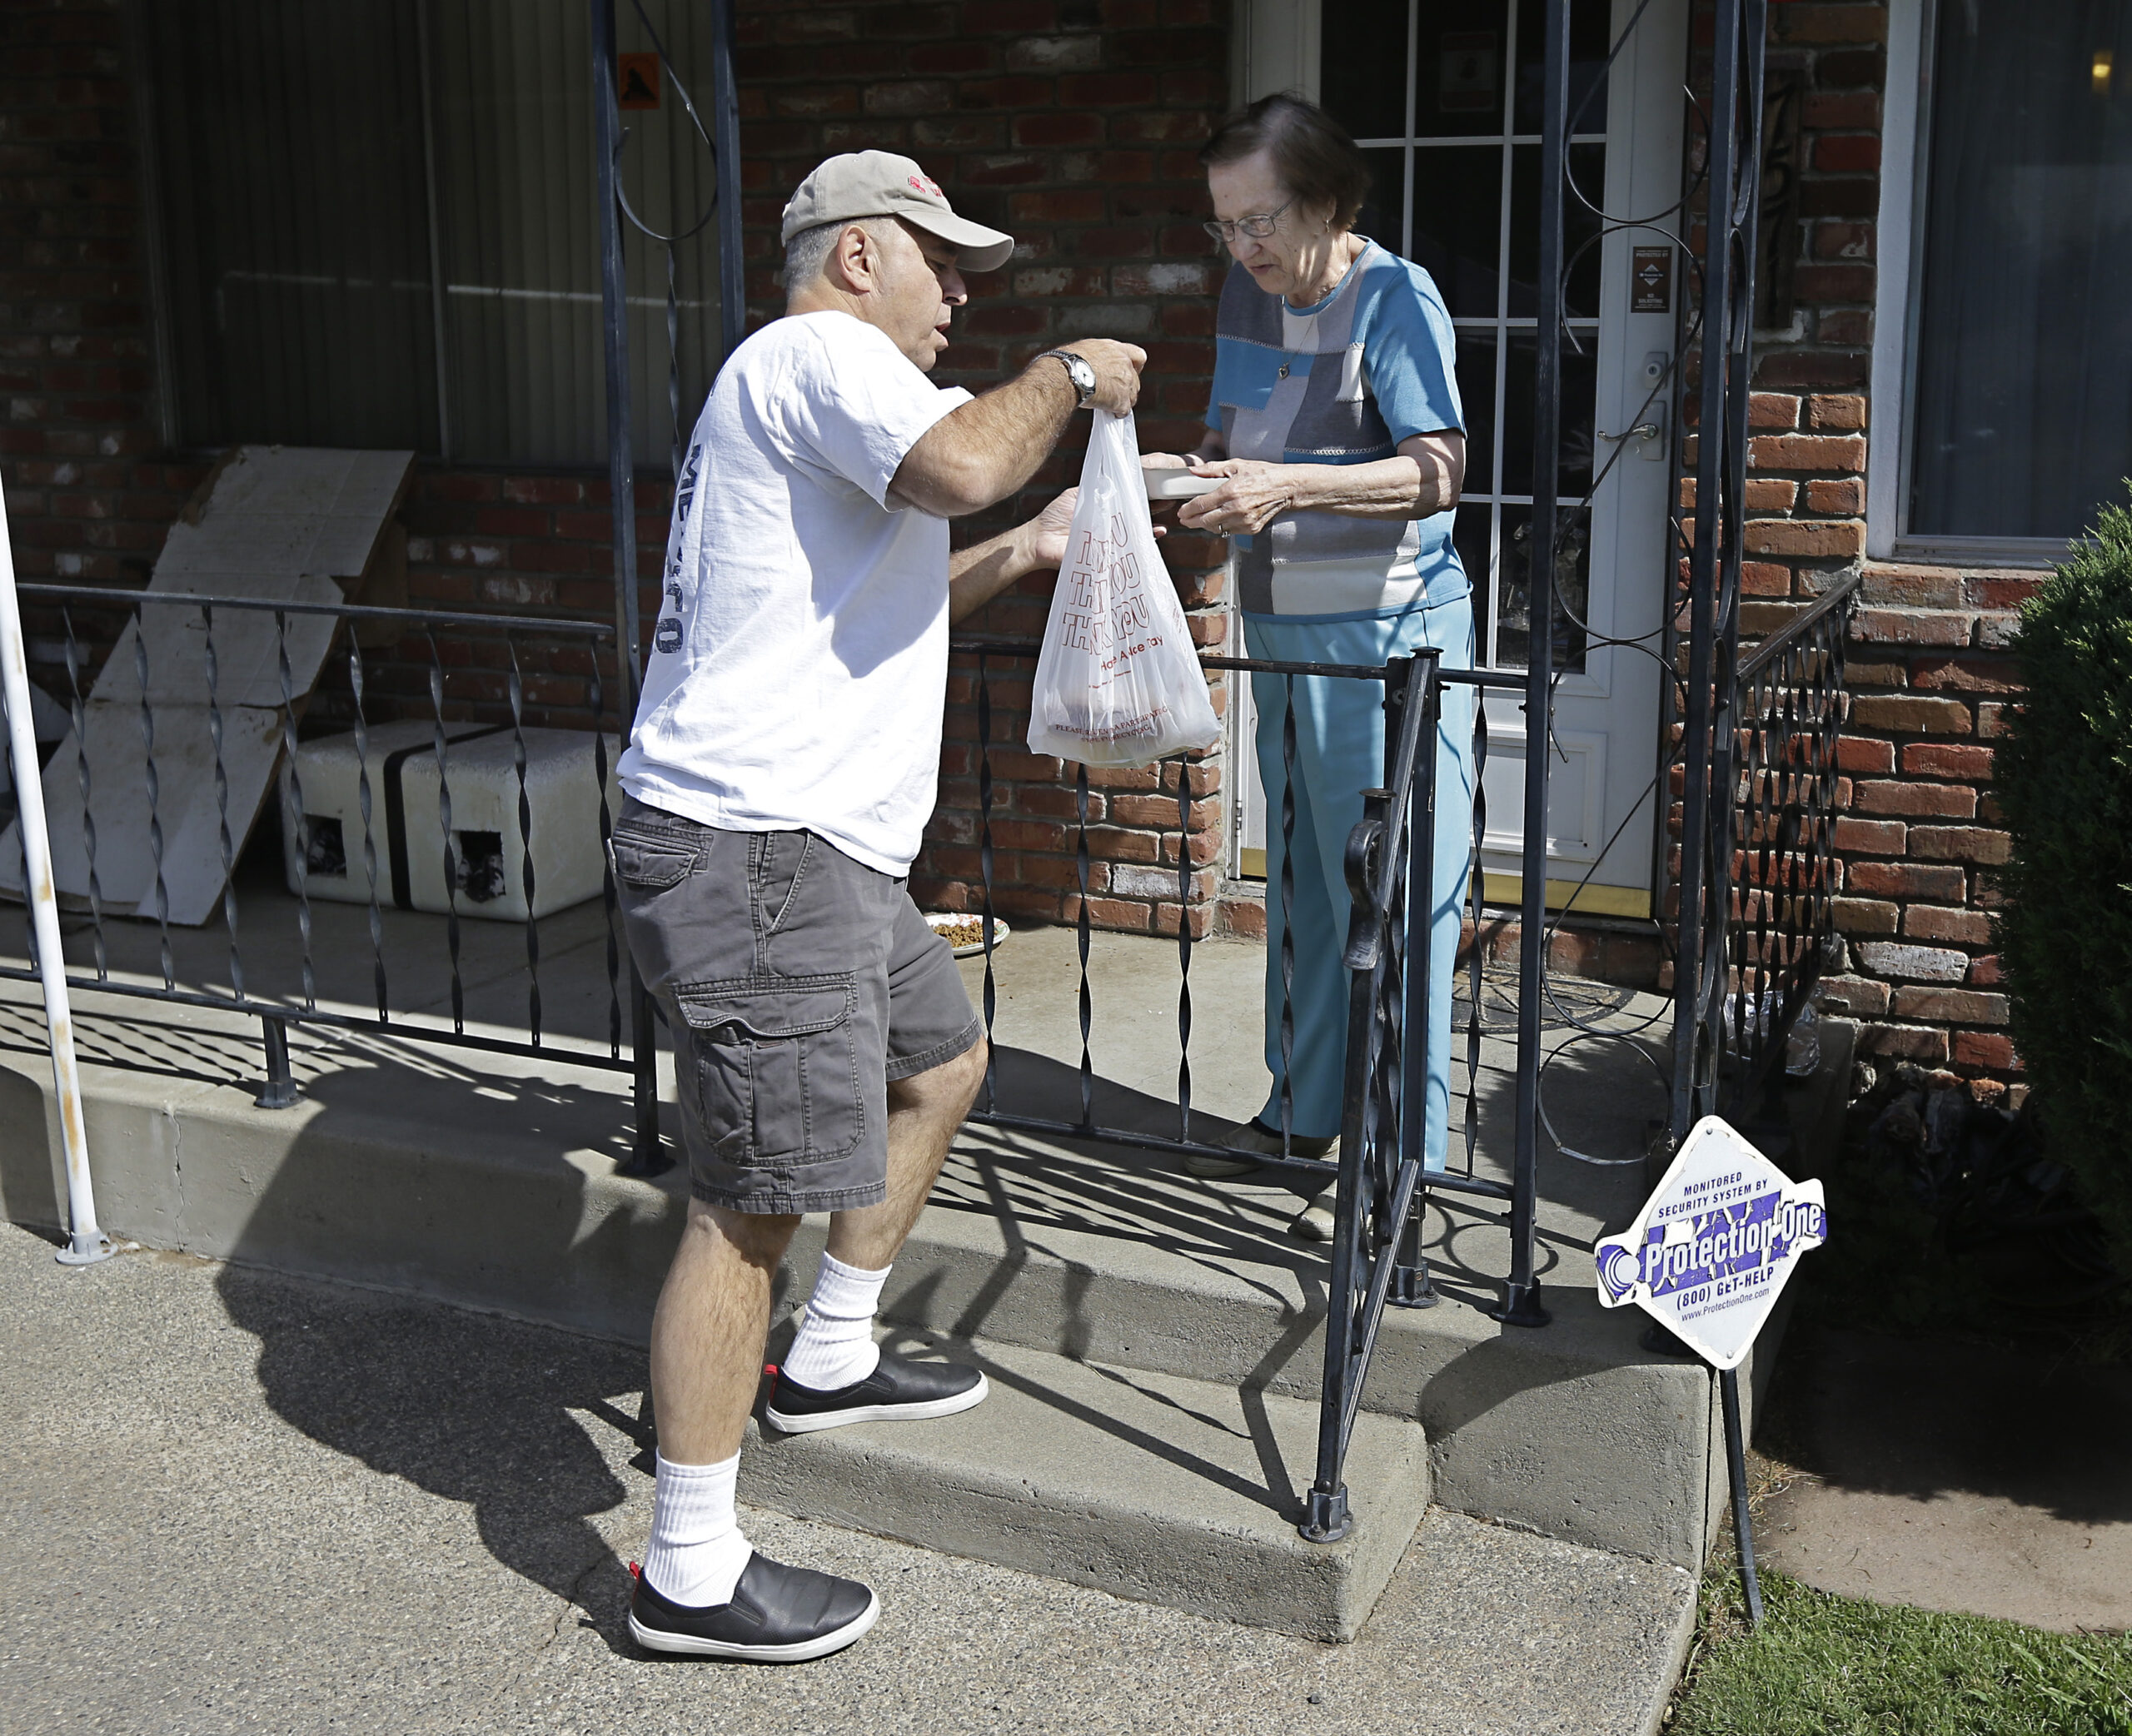 Bob Gill, a volunteer with Meals on Wheels, delivers lunch to Thelma Pense